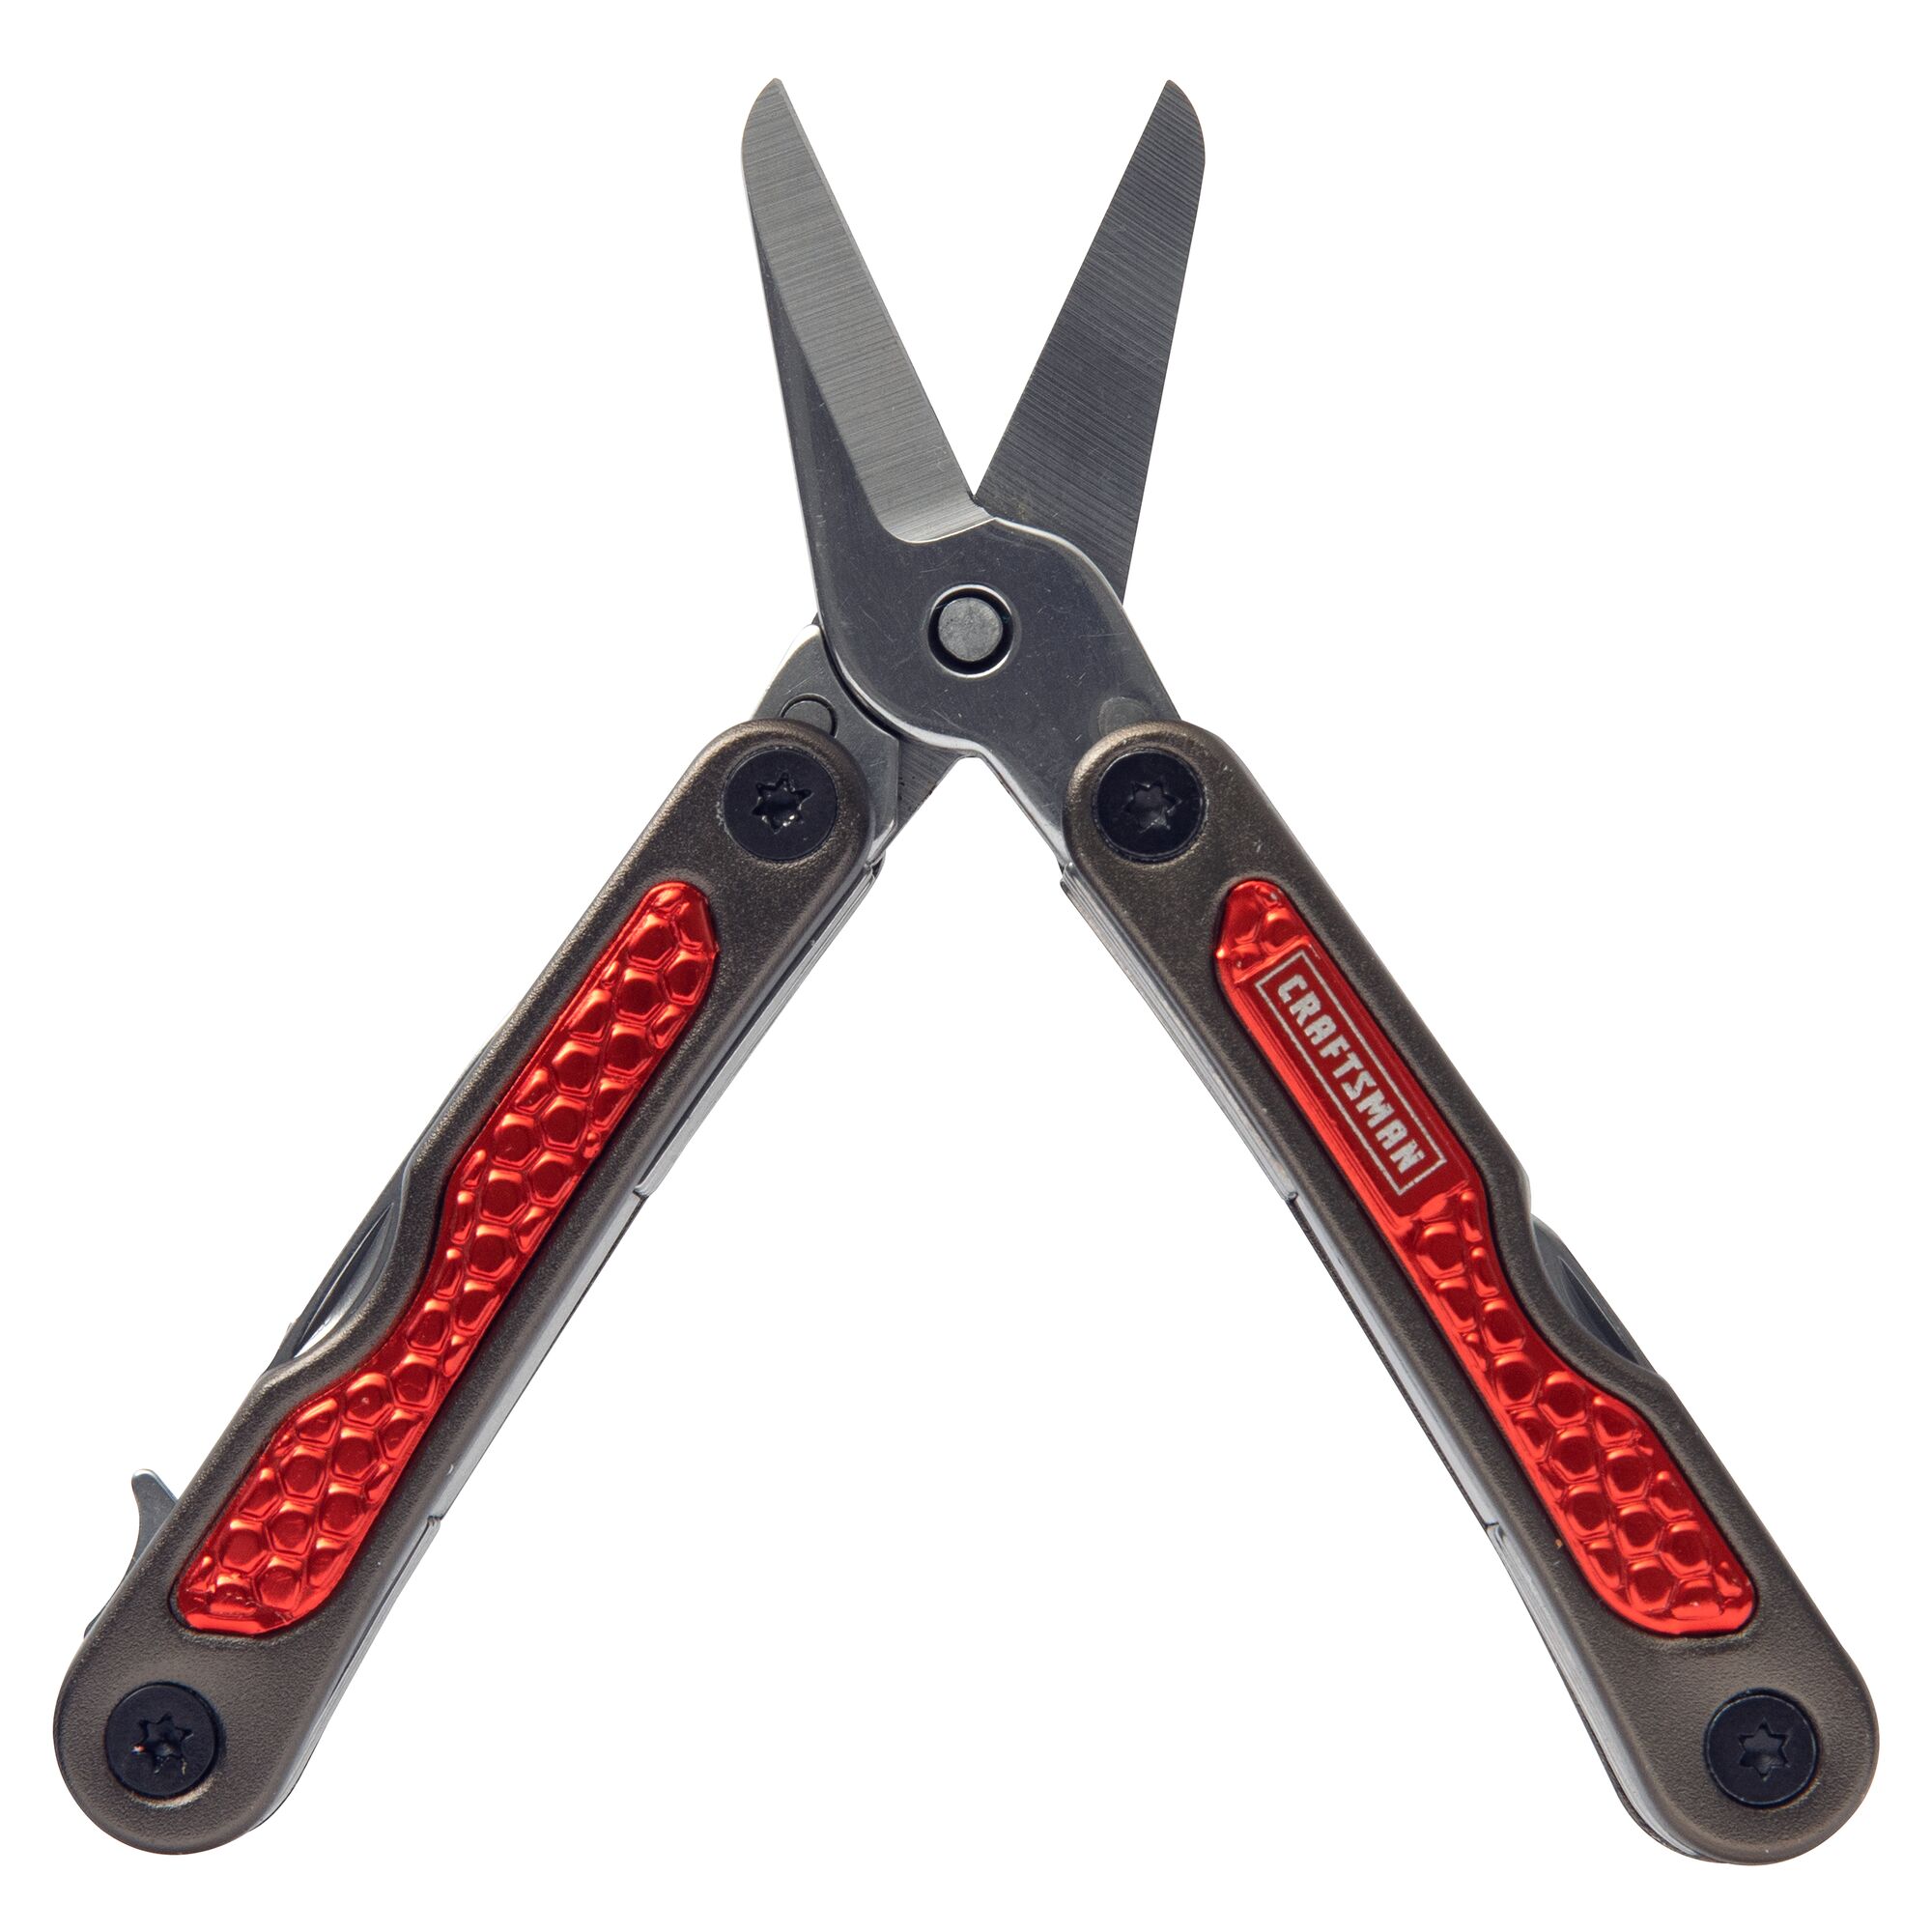 View of CRAFTSMAN Multi-Tools on white background